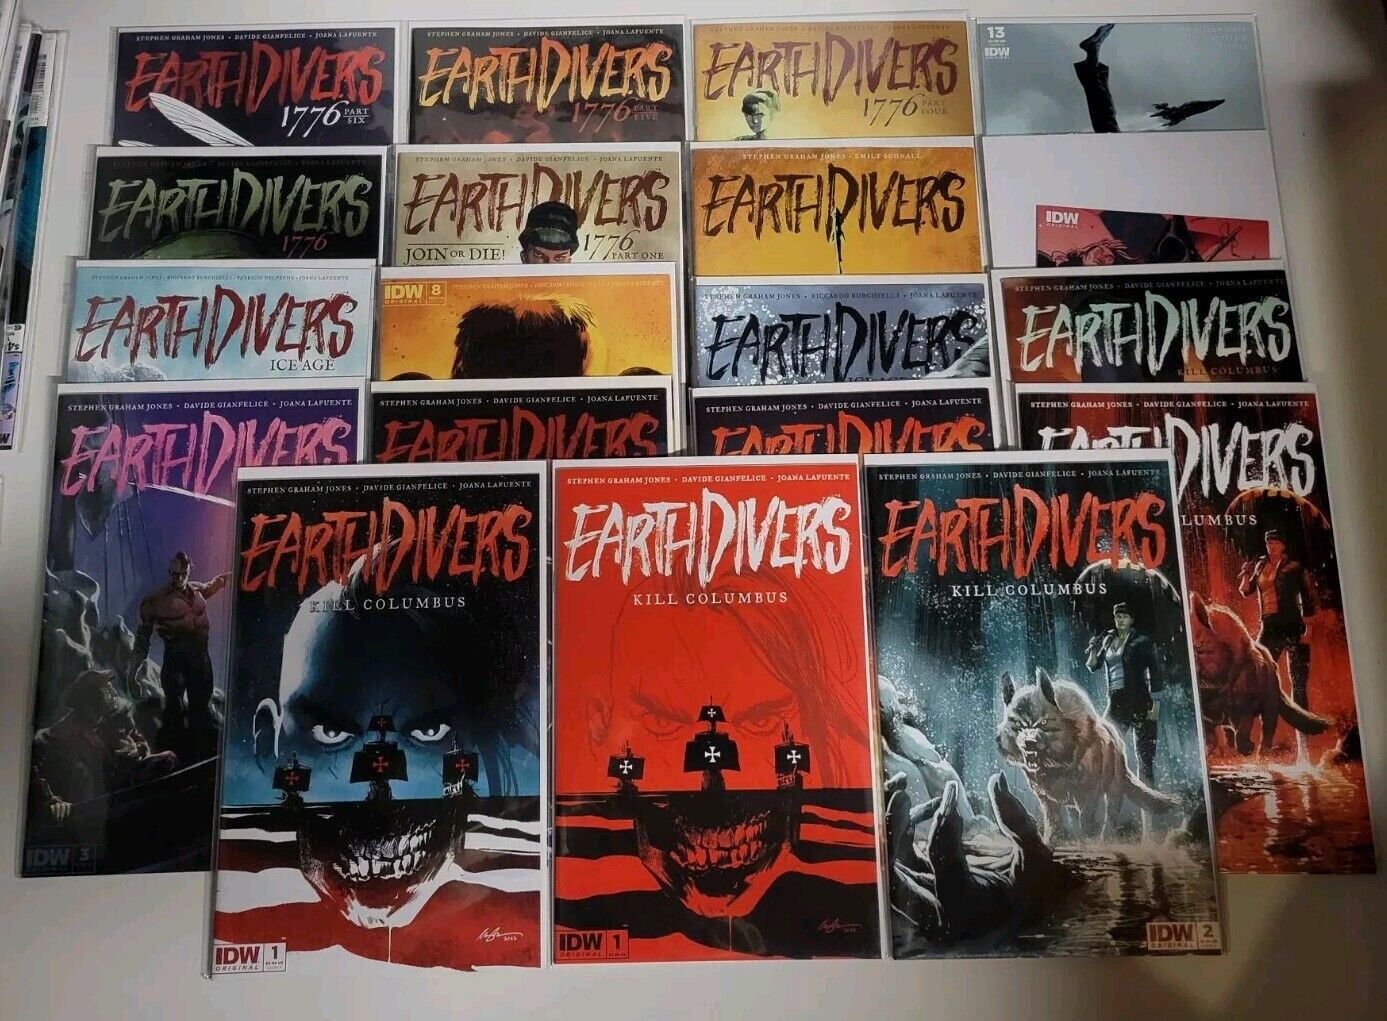 EARTHDIVERS #1-16 (2022) NM-/VF+ COMPLETE SERIES 18 BOOK SET RUN IDW PUBLISHING